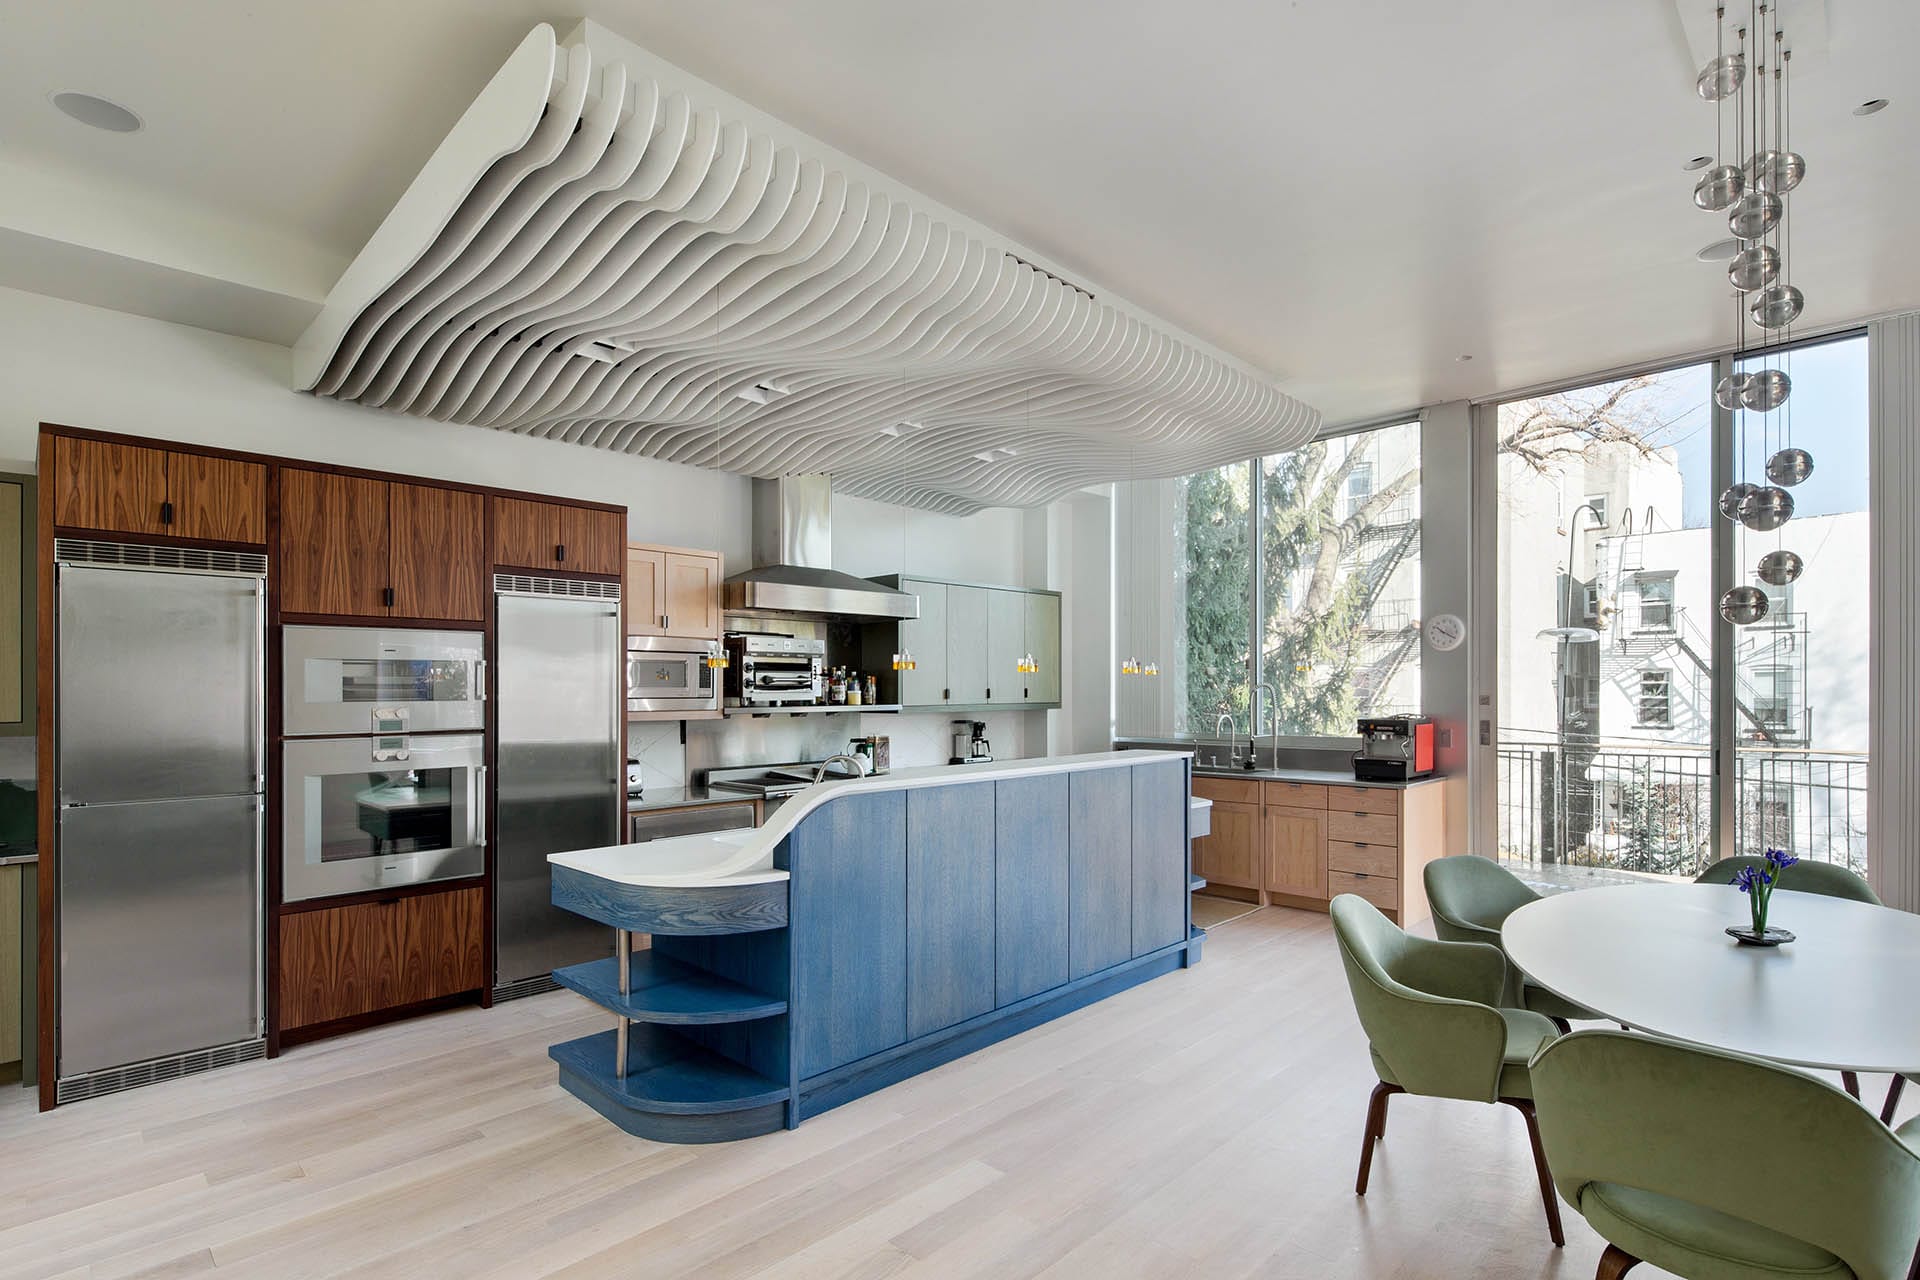 Kitchen with mixed wood cabinetry, a blue wood island, bocce light fixture, and white sculptural element on the ceiling